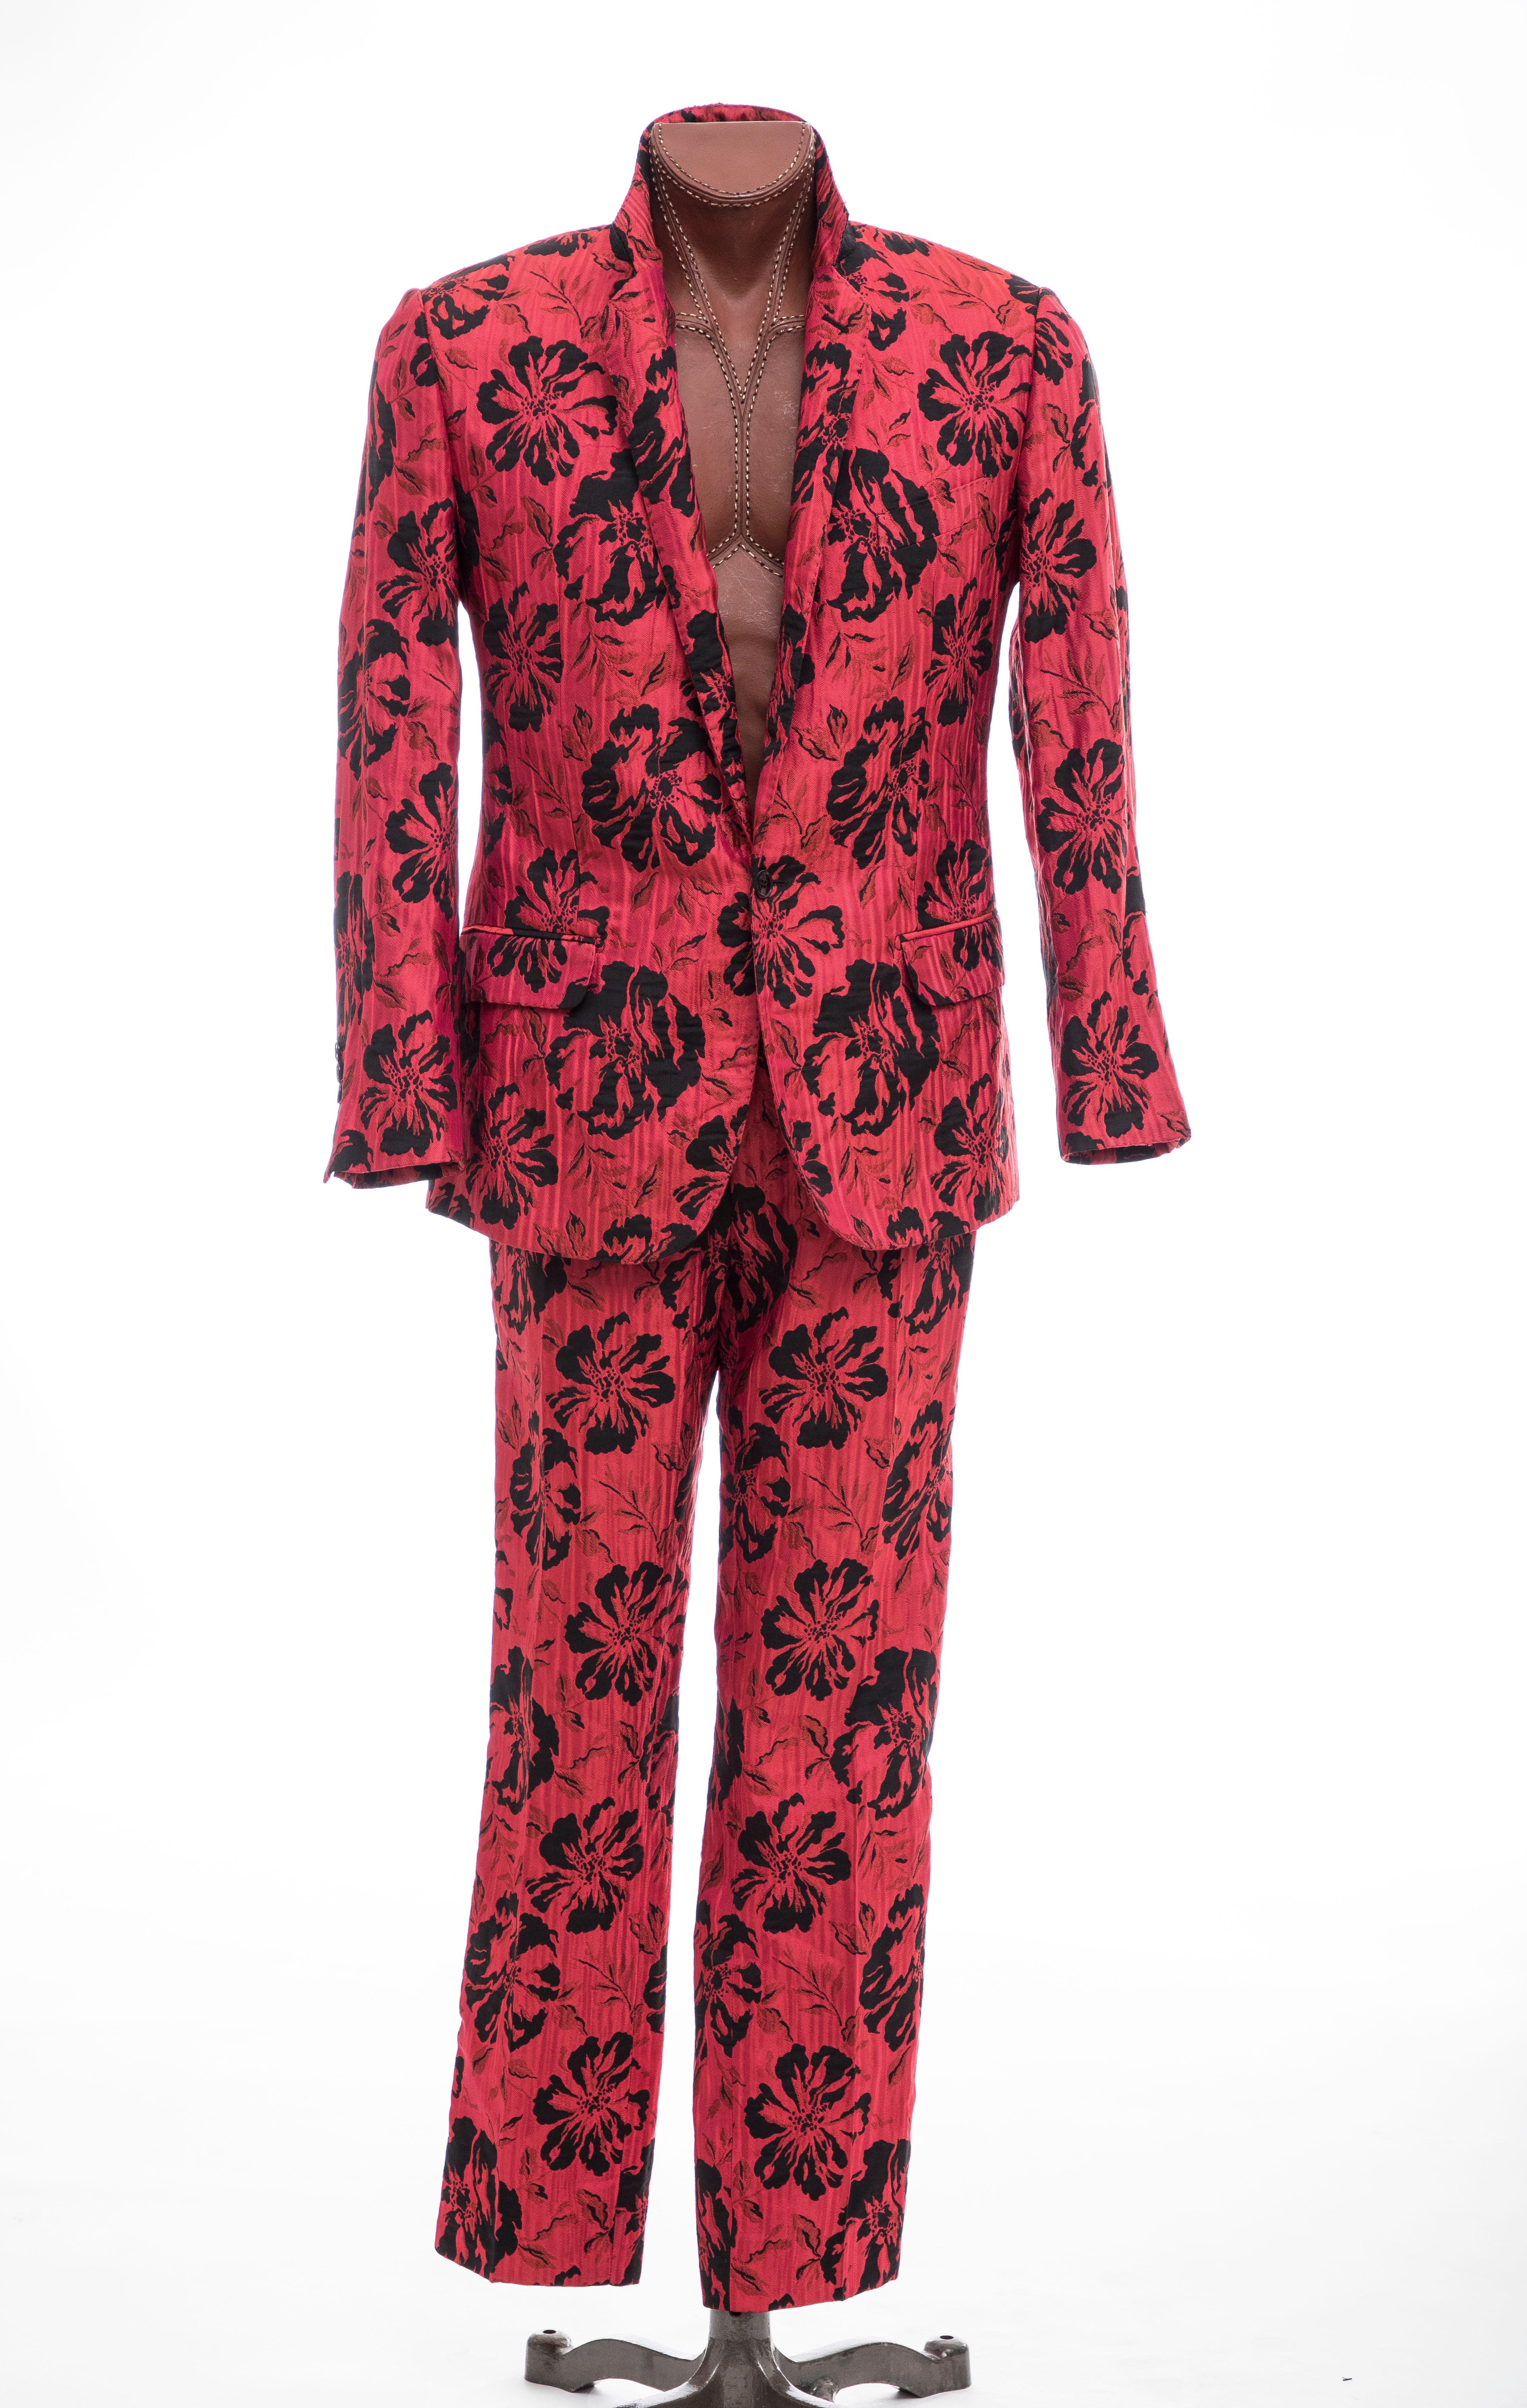 Dolce & Gabbana Men's Runway Red Floral Jacquard Suit, Fall 2011 6